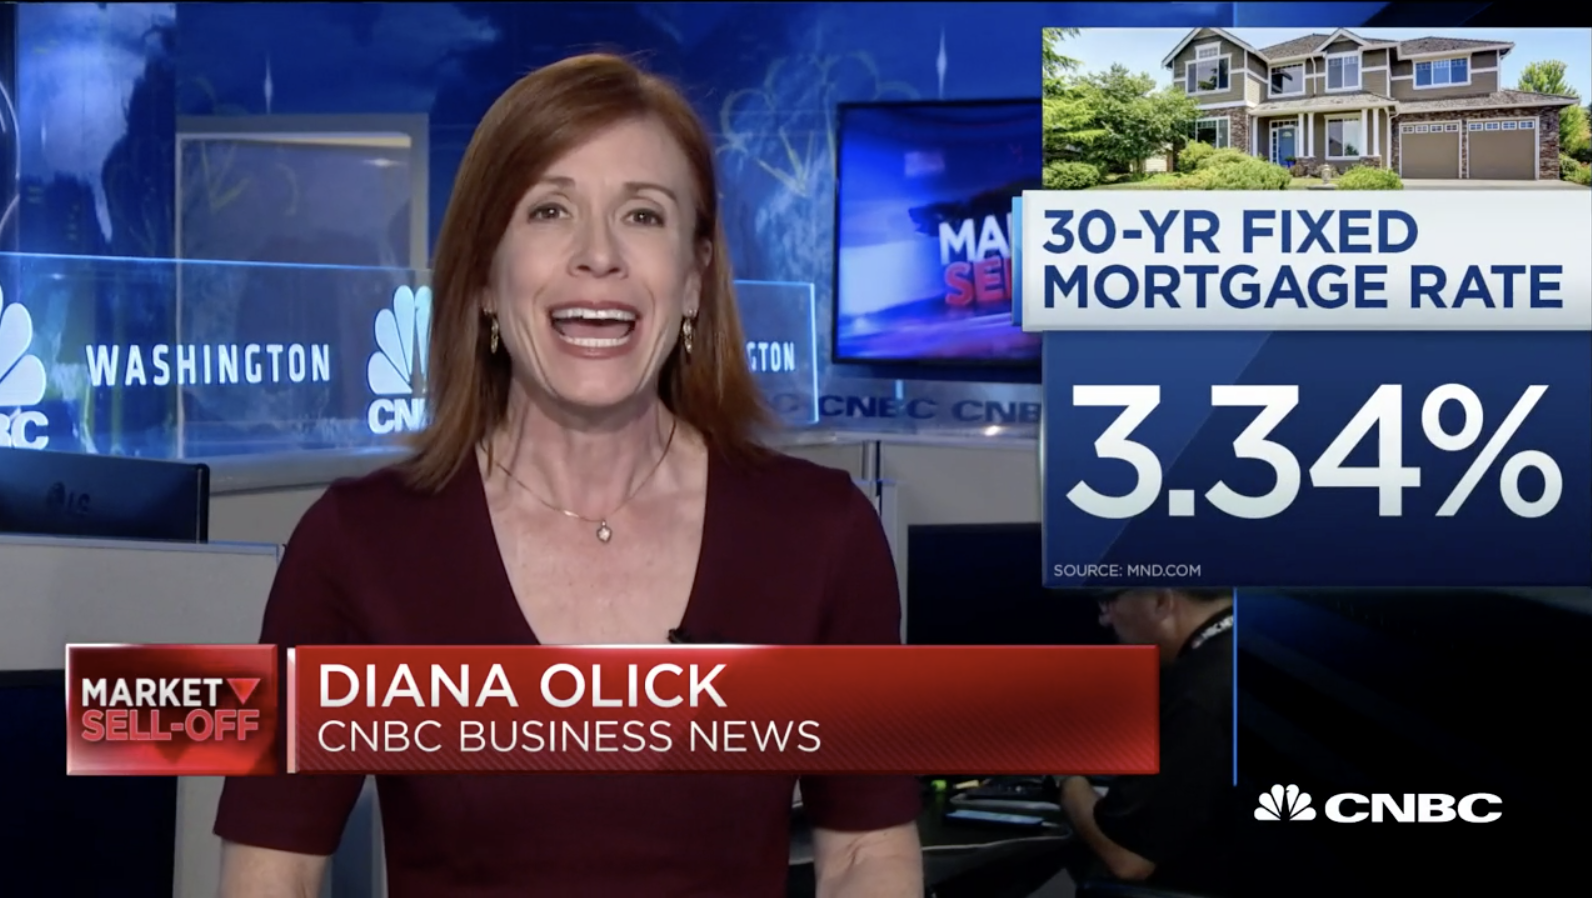 CNBC Video: New Home Refinancing Has Stagnated The Housing Market